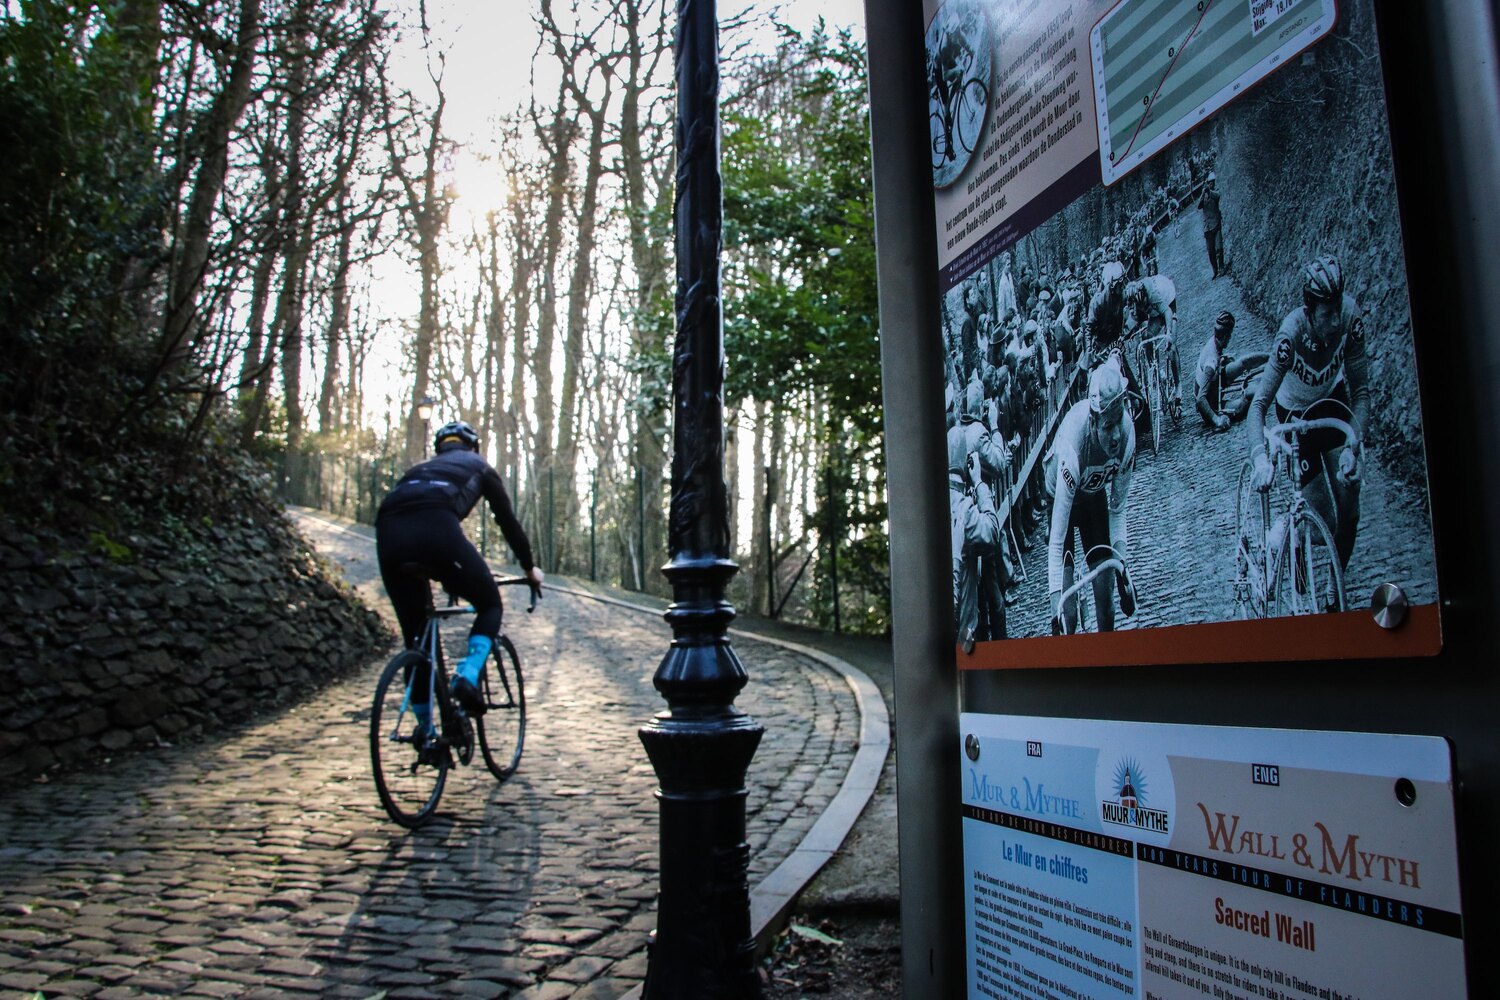 one of the cobbled hills in Belgium